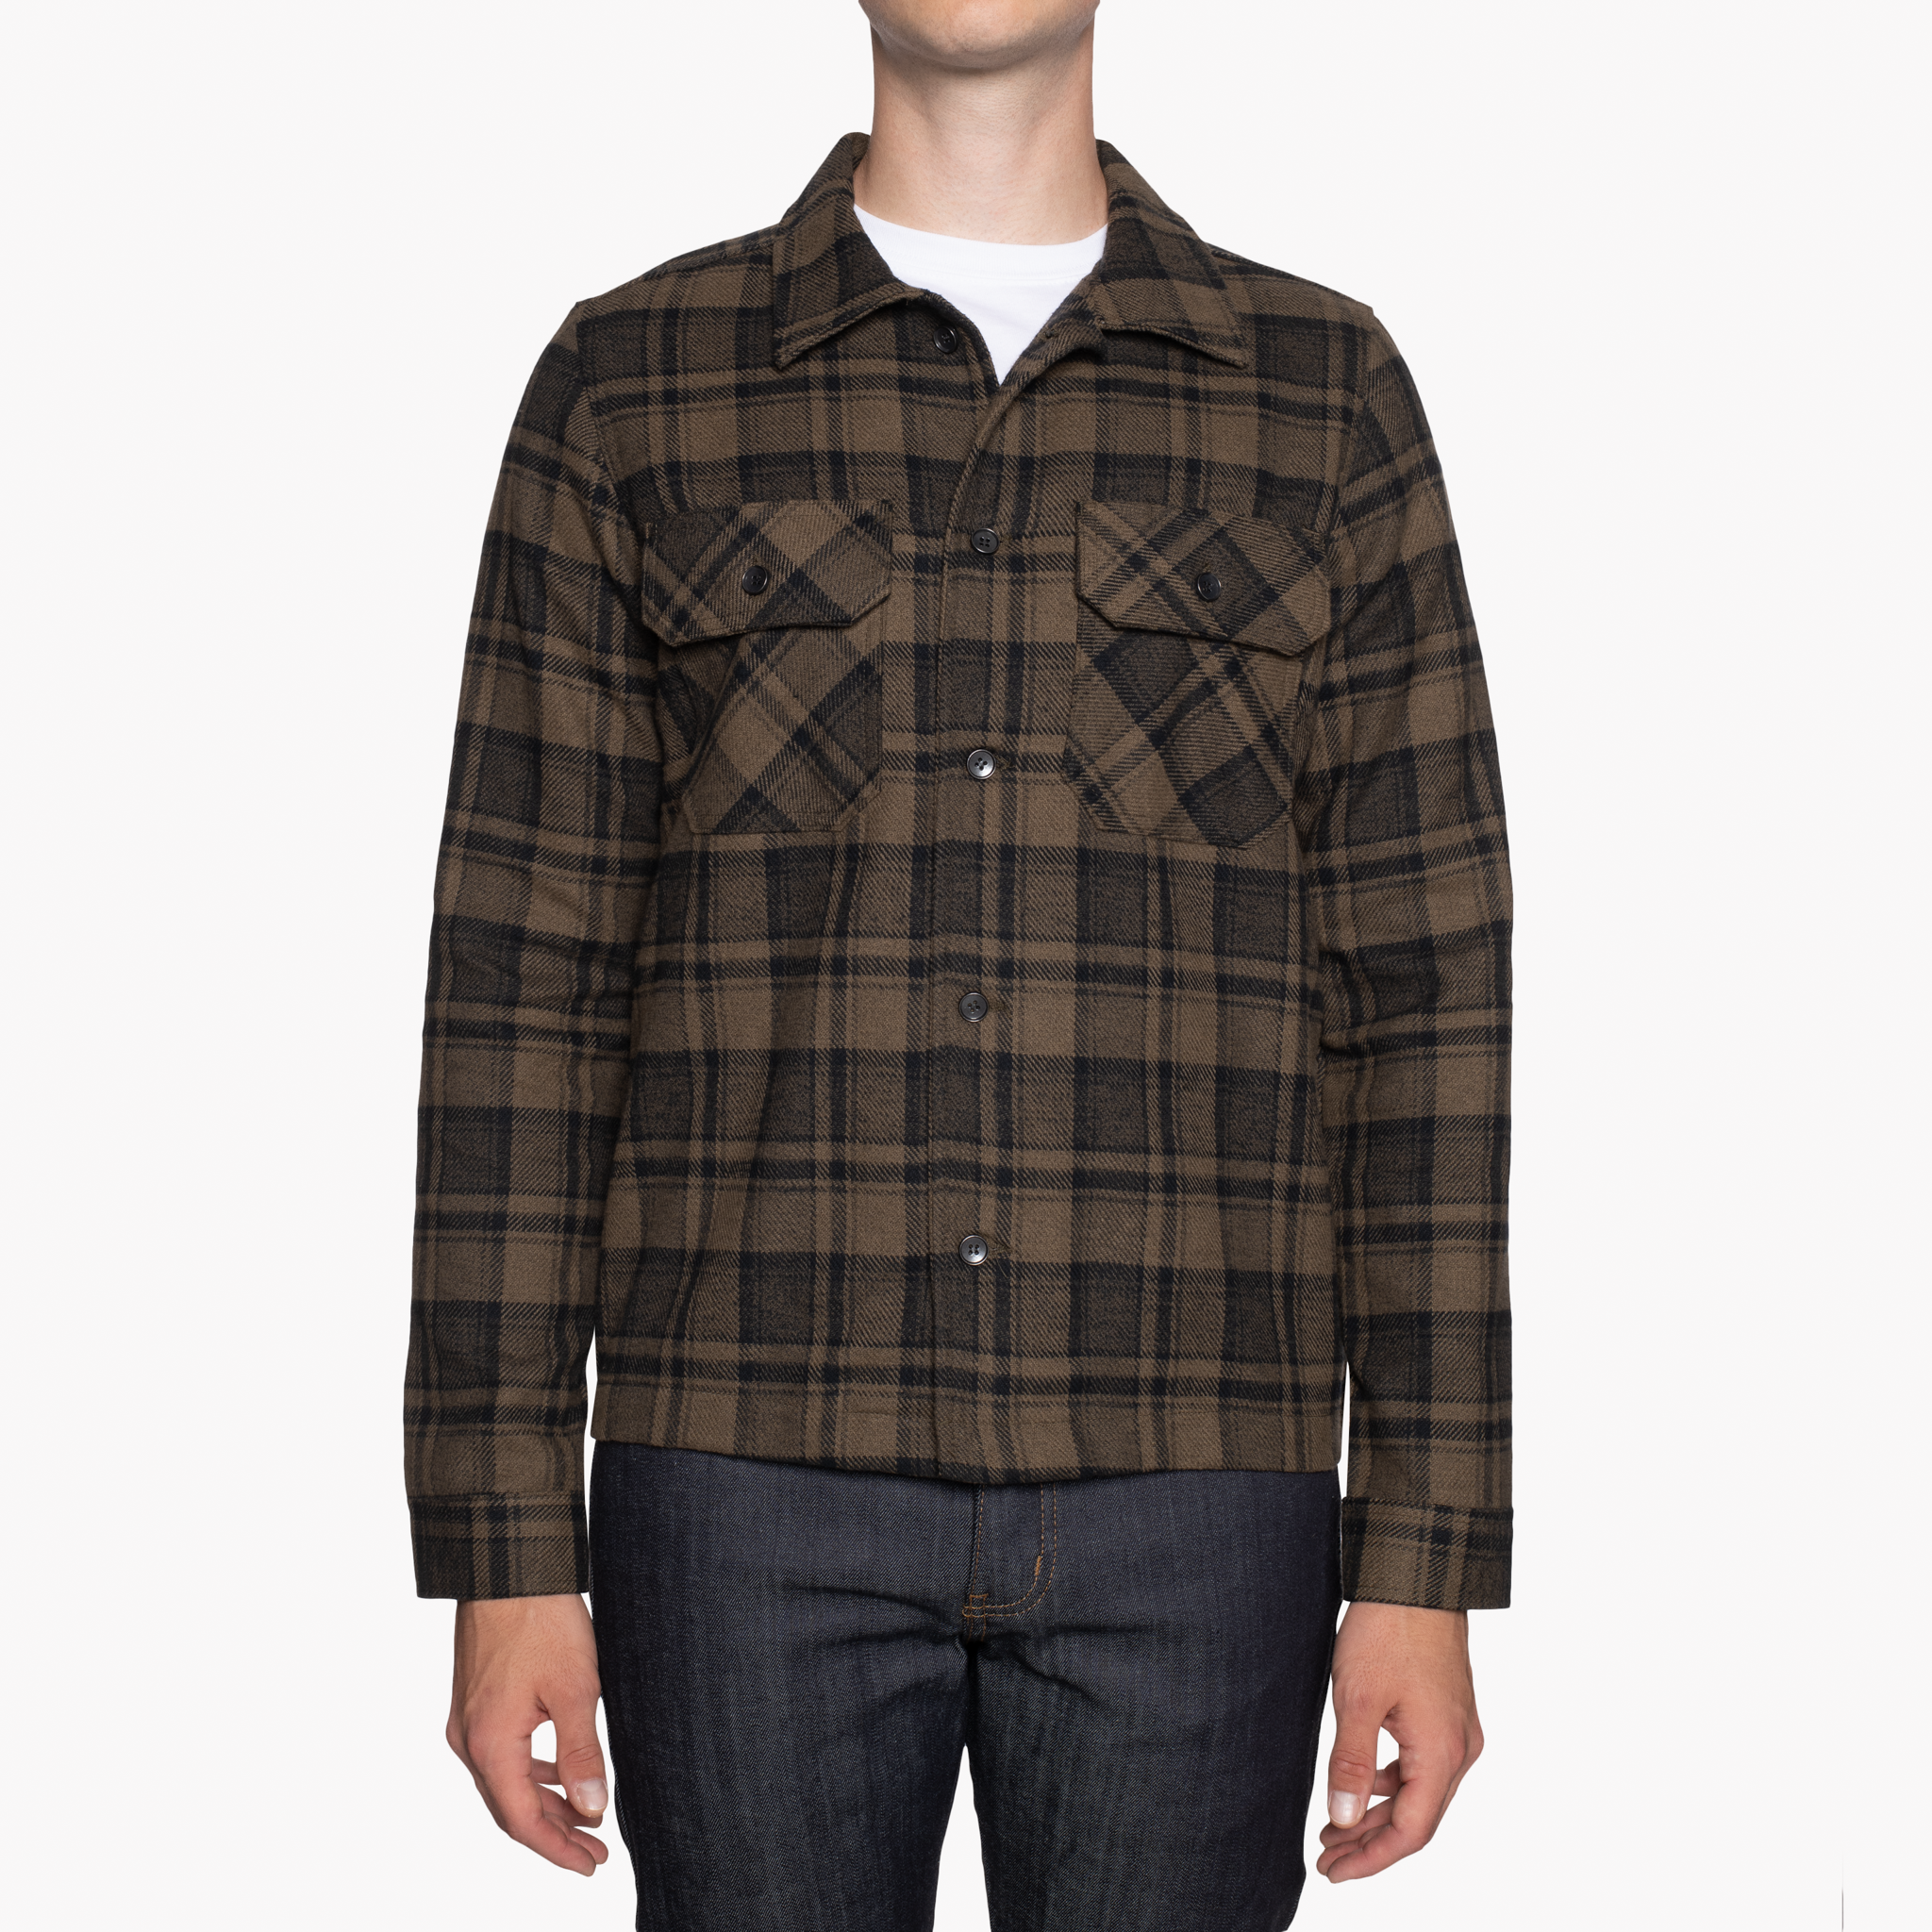  Work Shirt - Heavy Vintage Flannel - Earth - front 